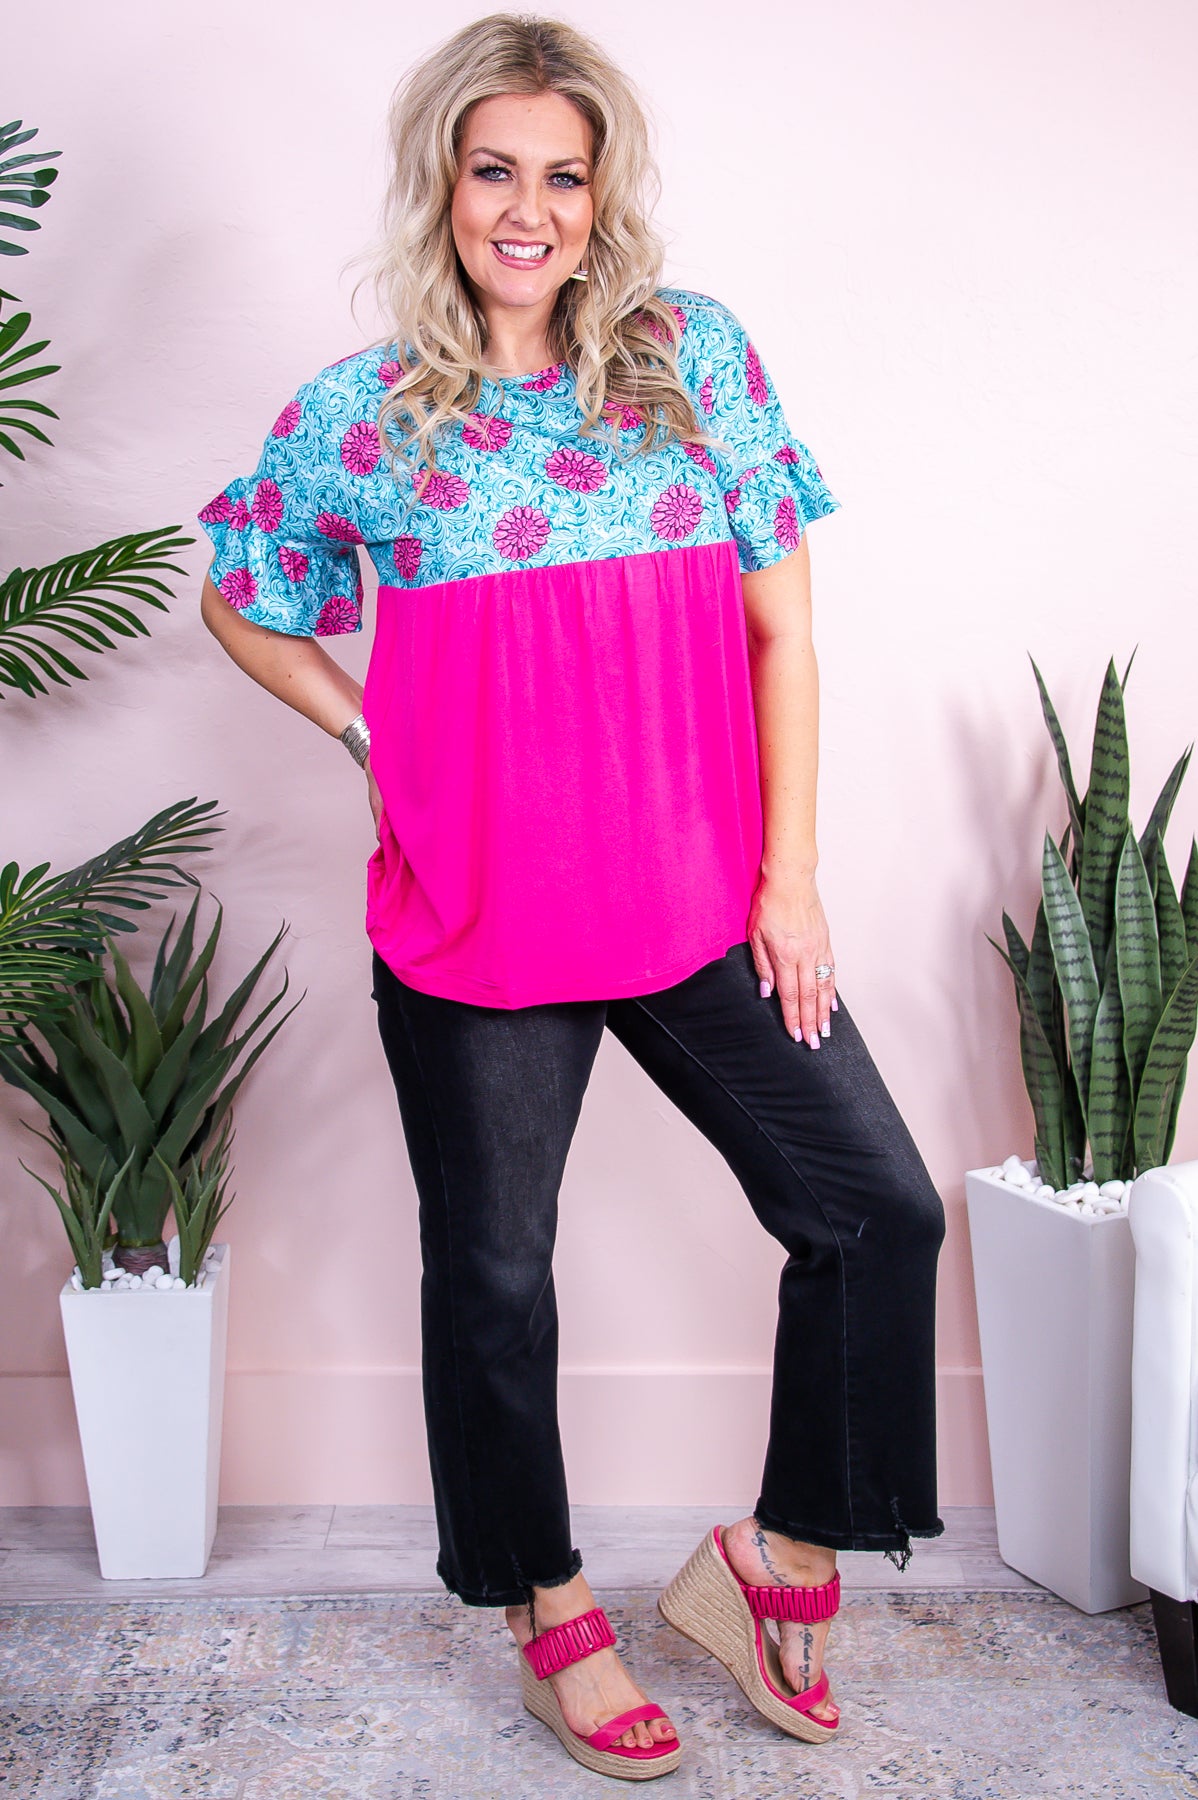 Unstoppable Energy Turquoise/Fuchsia Printed Top - T9281TU